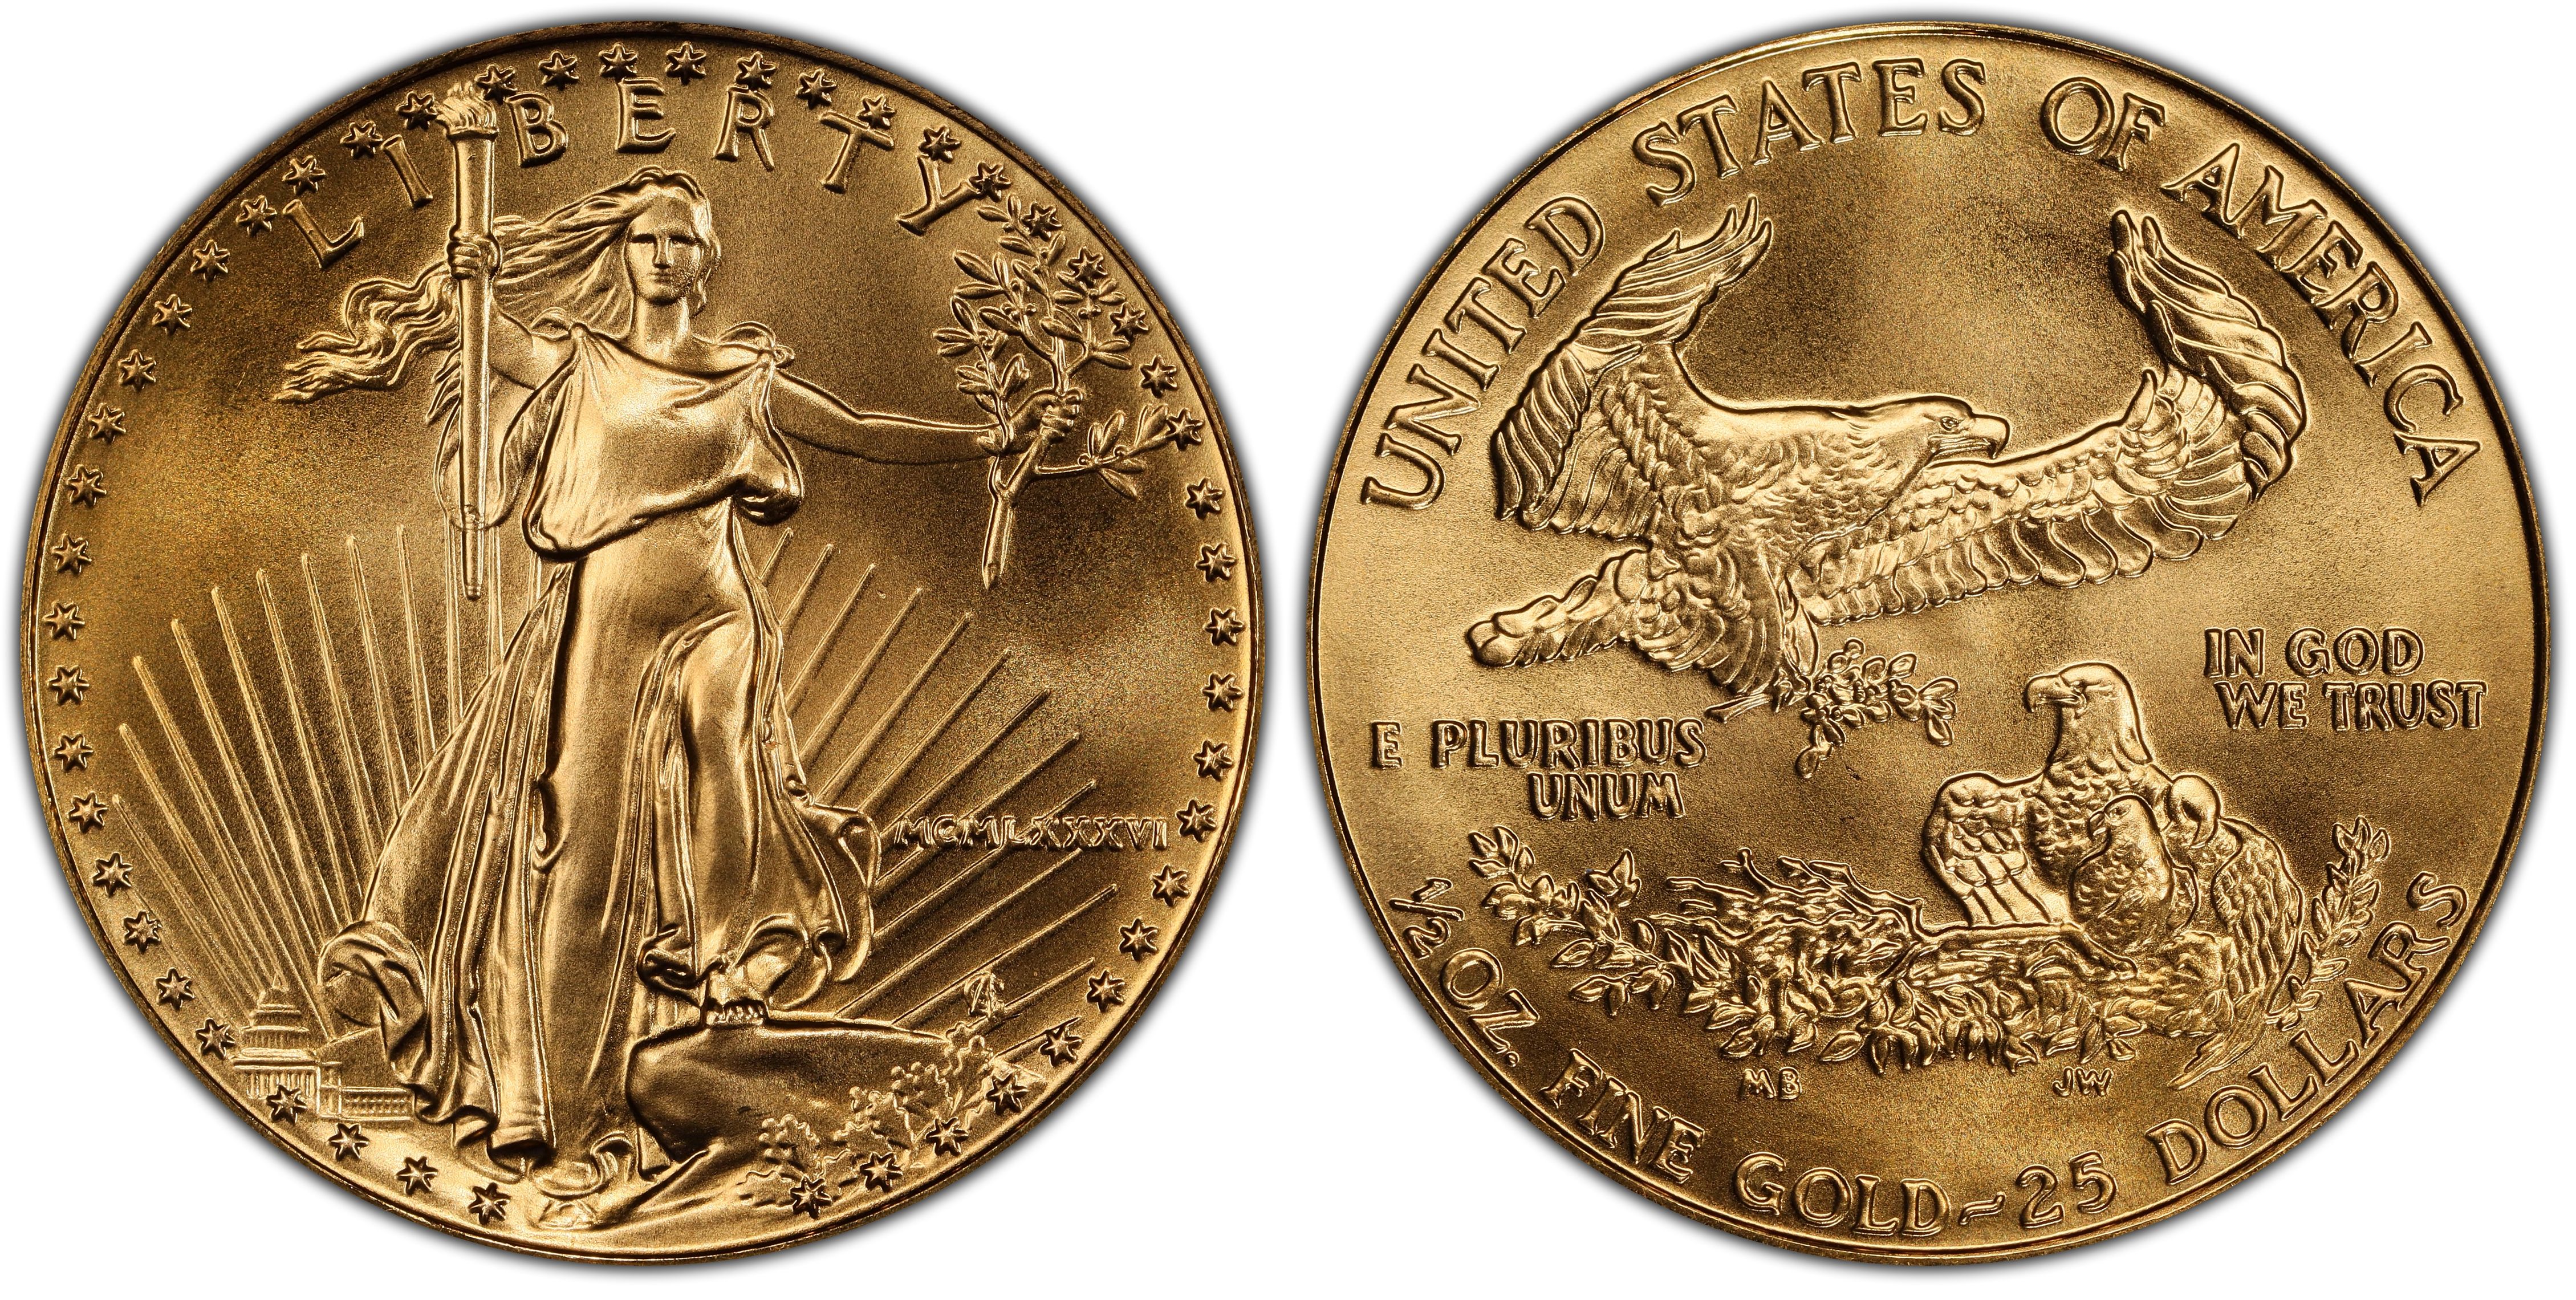 1986 $25 Gold Eagle (Regular Strike) Gold Eagles - PCGS CoinFacts